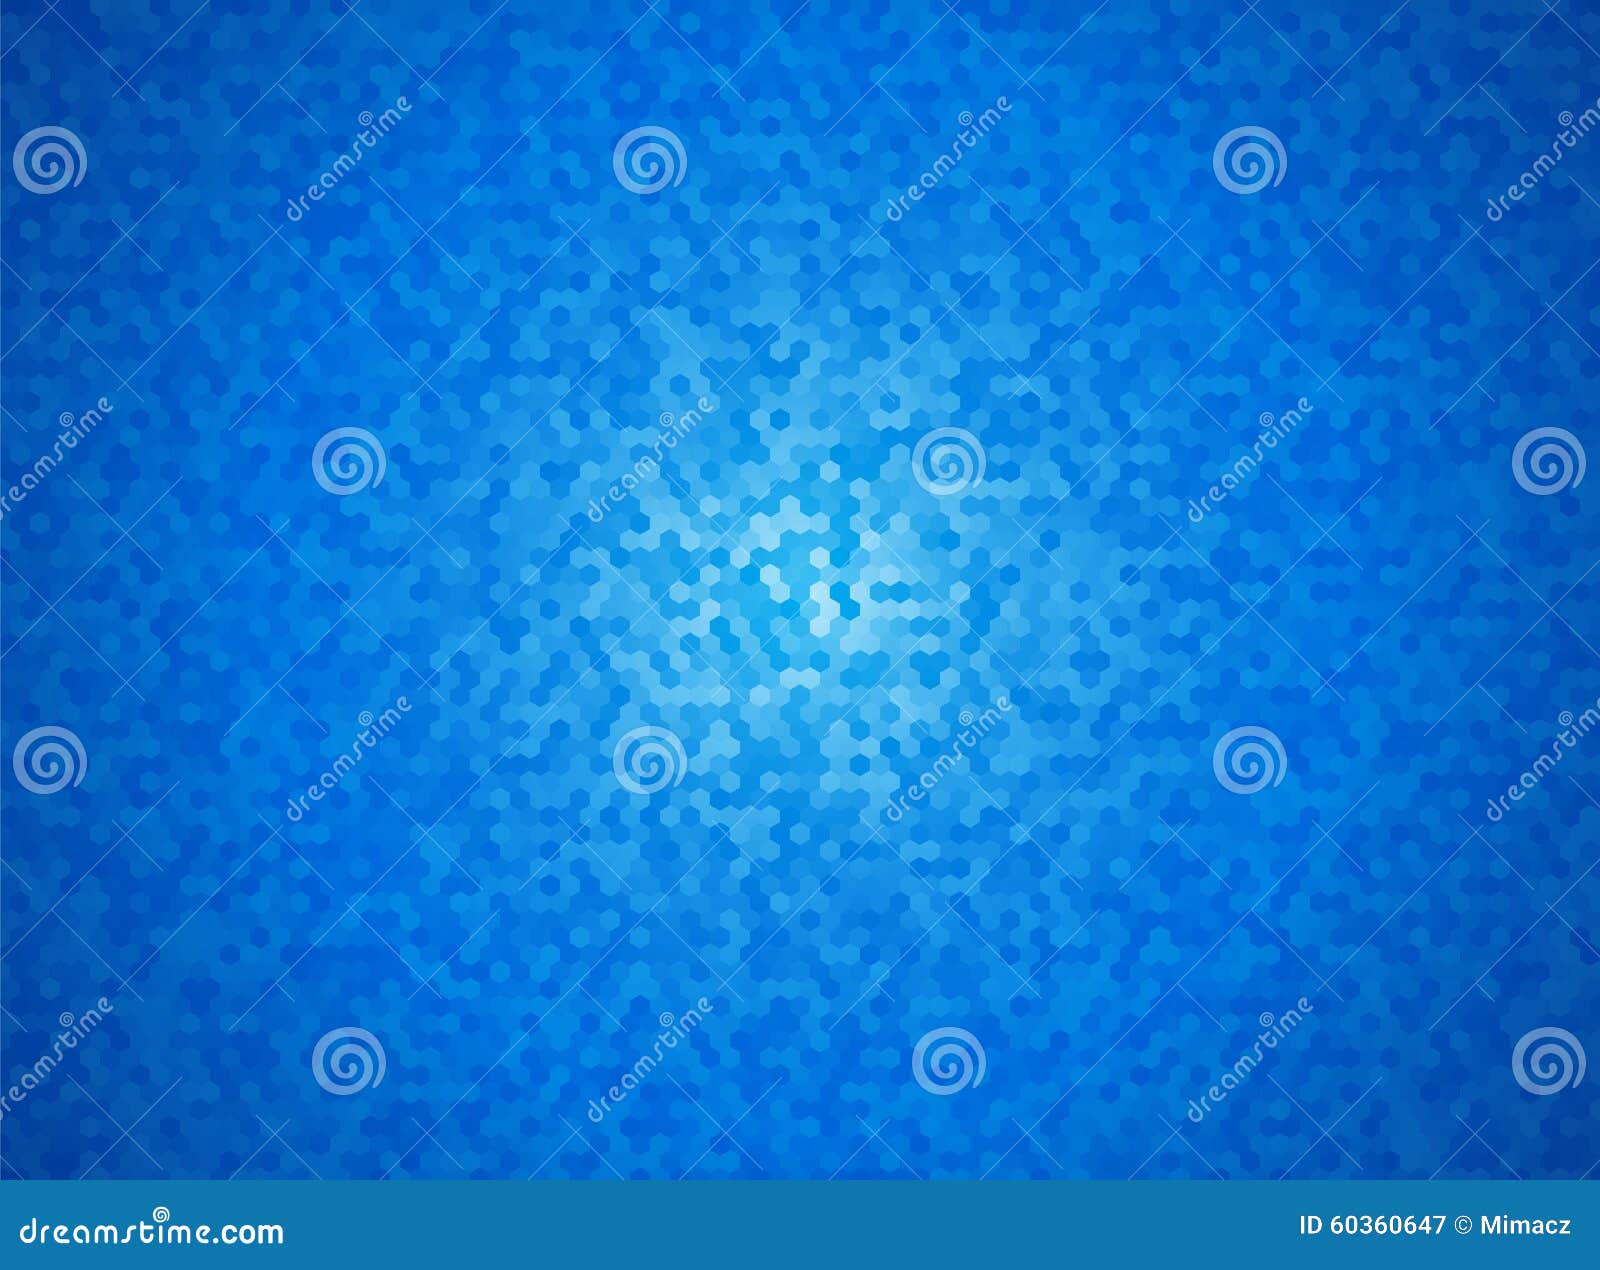 cool ice blue hexagon background